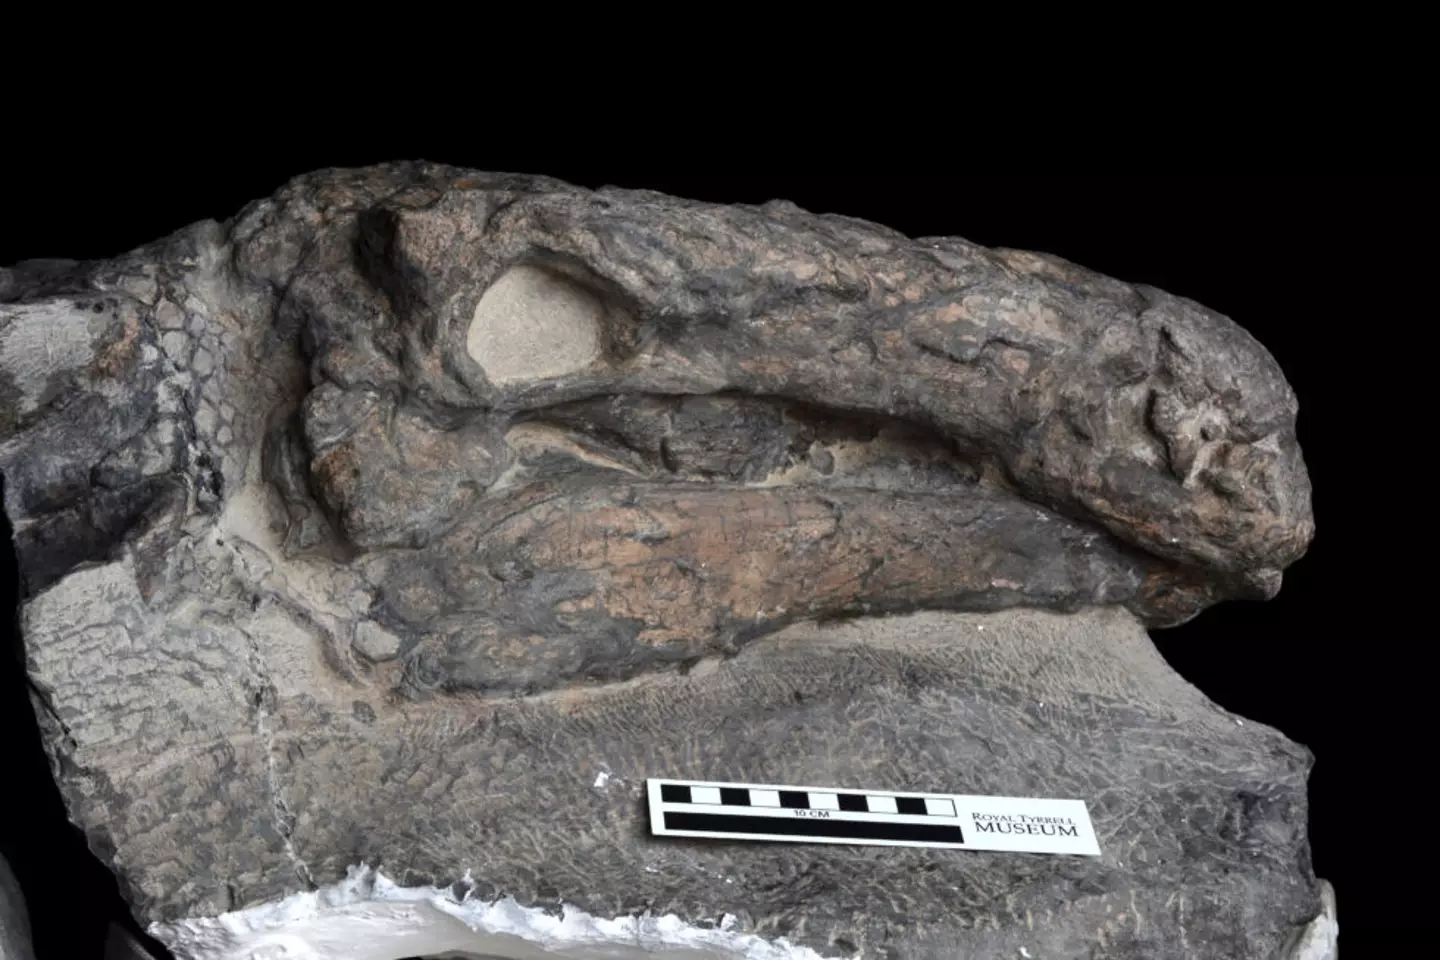 These nodosaur remains date back up to 100.5 million years ago.